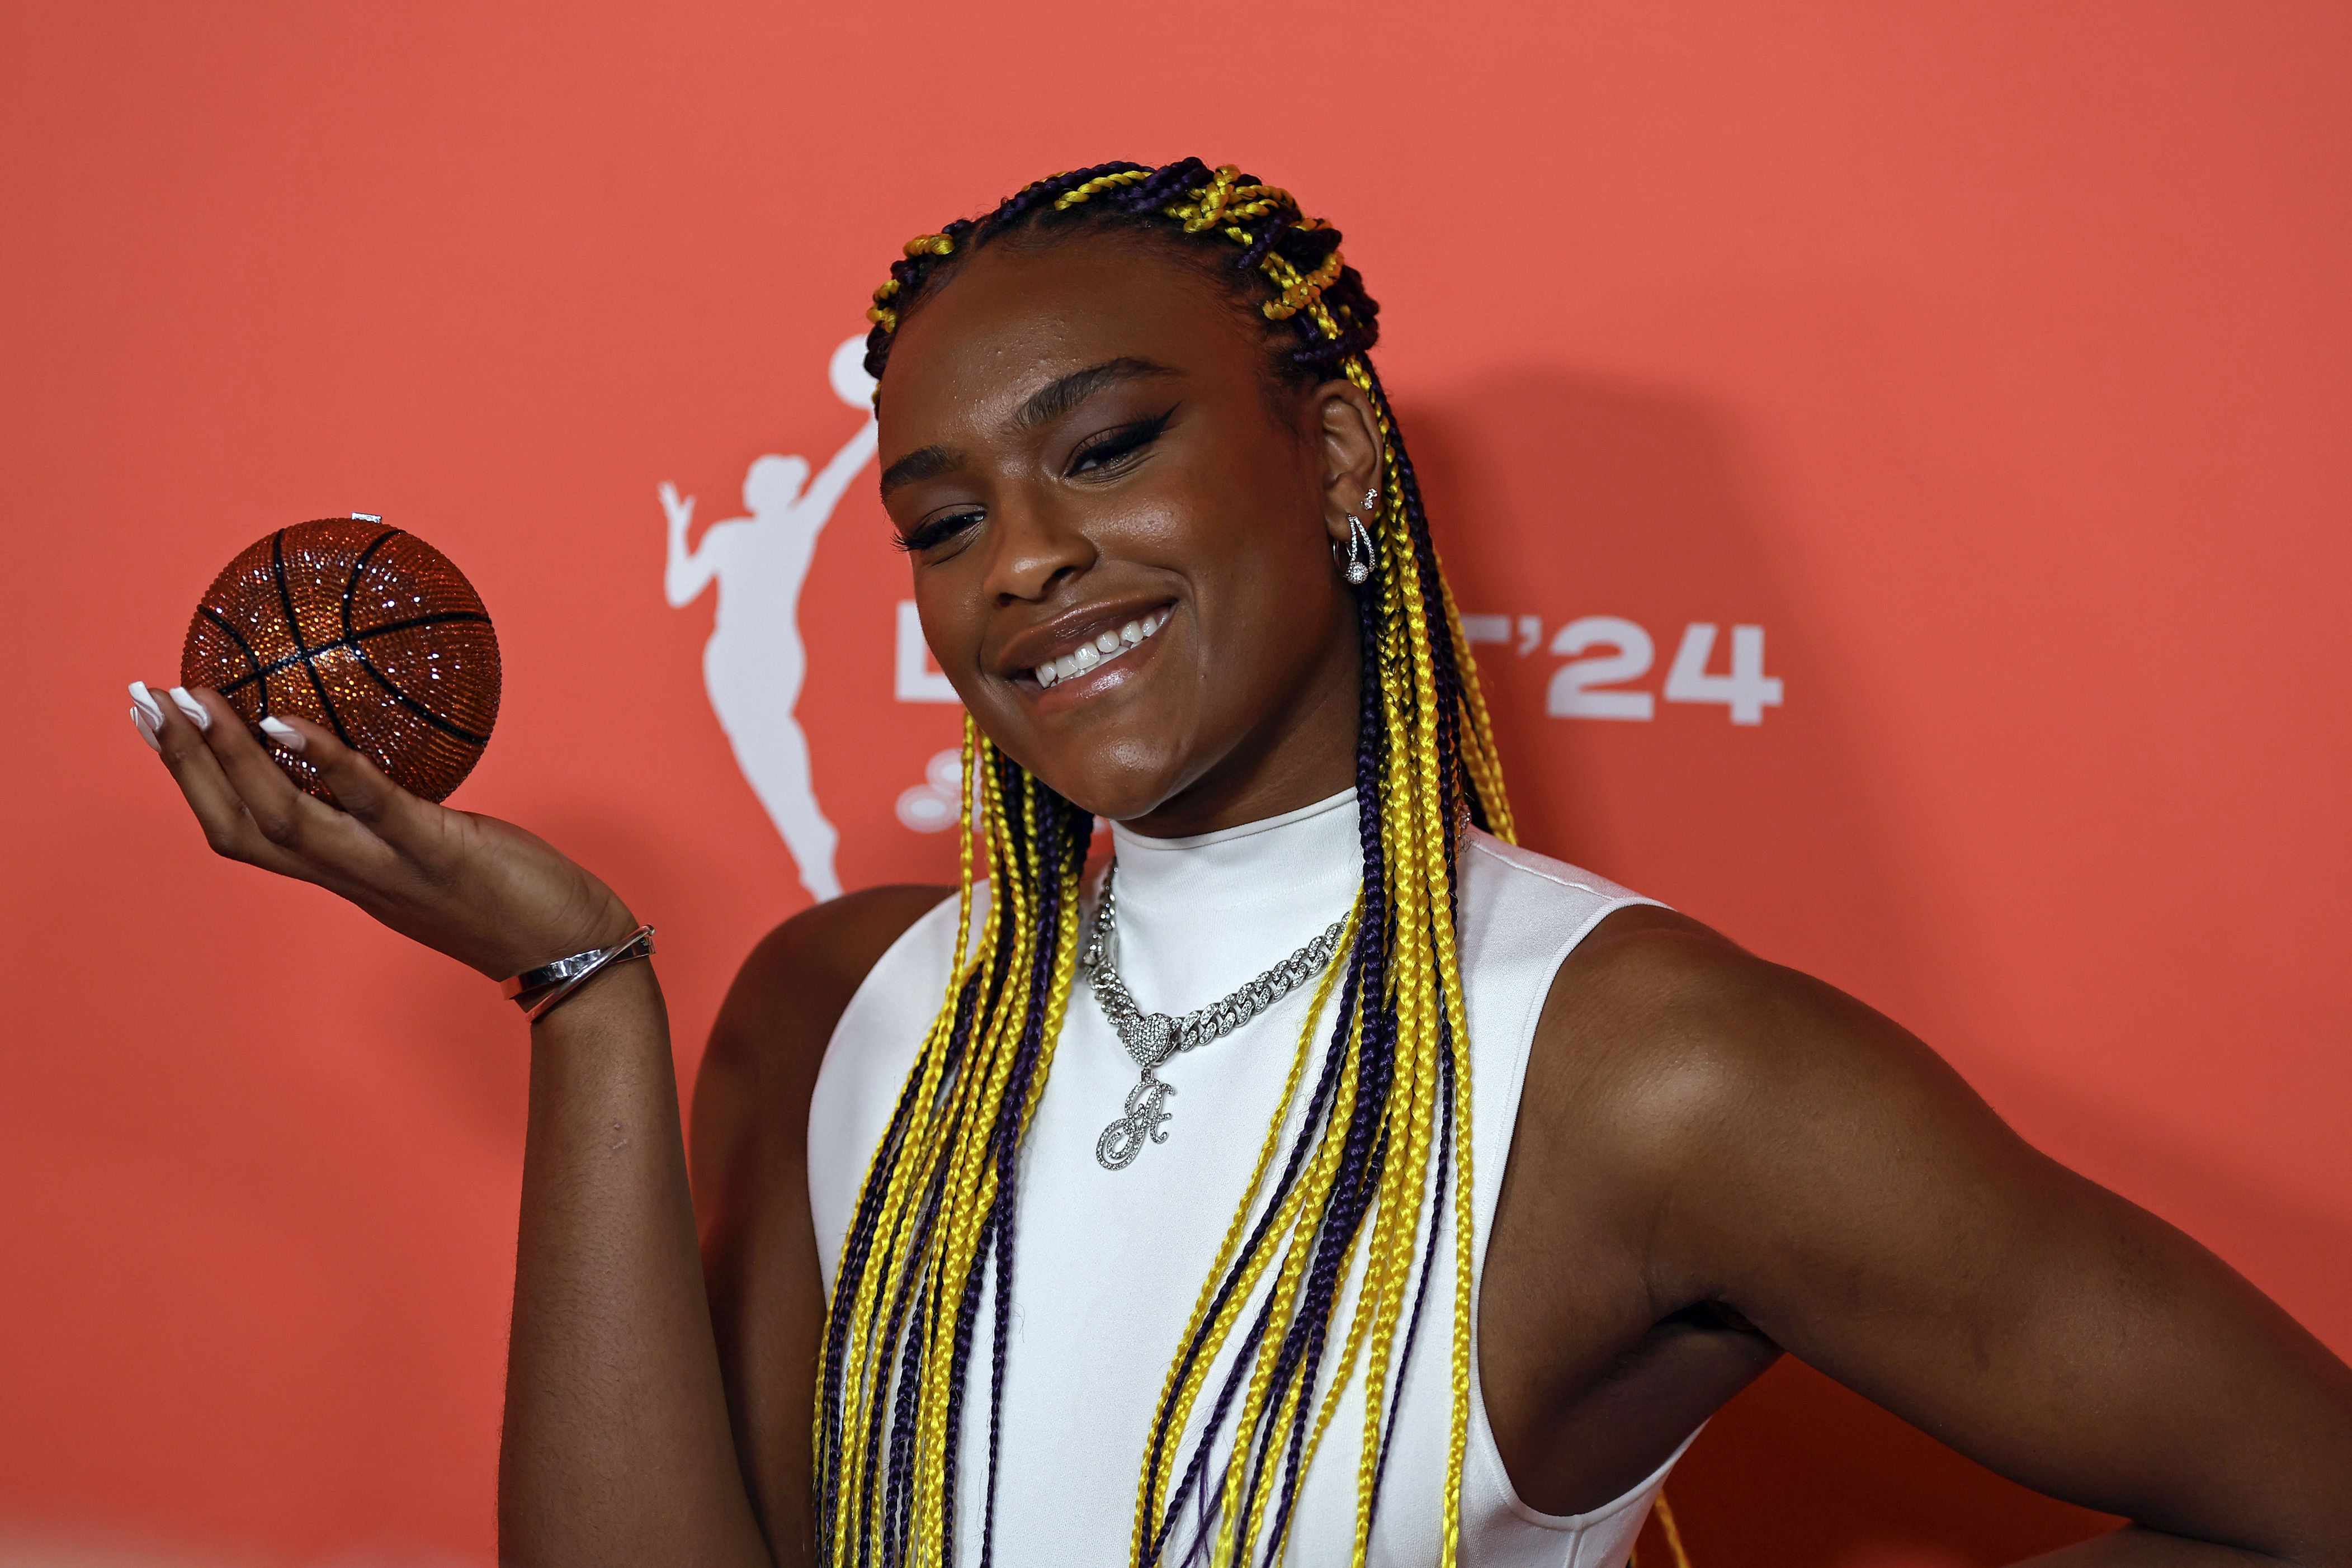 wnba fashionistas showcase their styles at the draft with spotlight on women's hoops